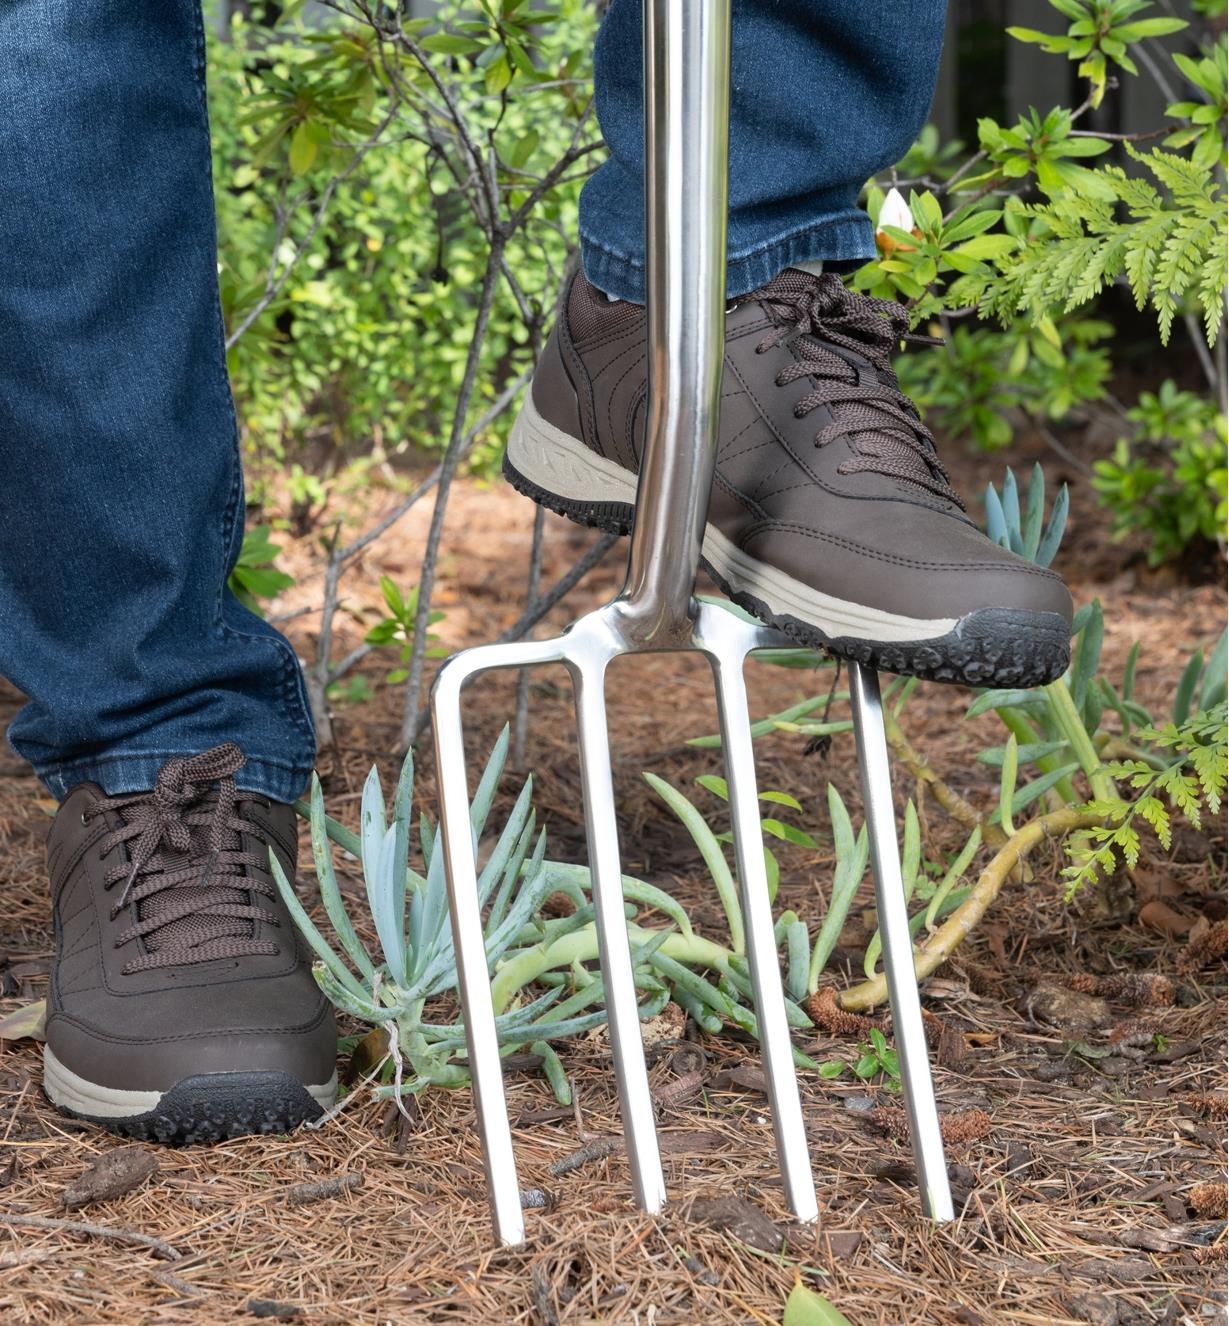 A gardener uses the foot tread to push the digging fork into the ground